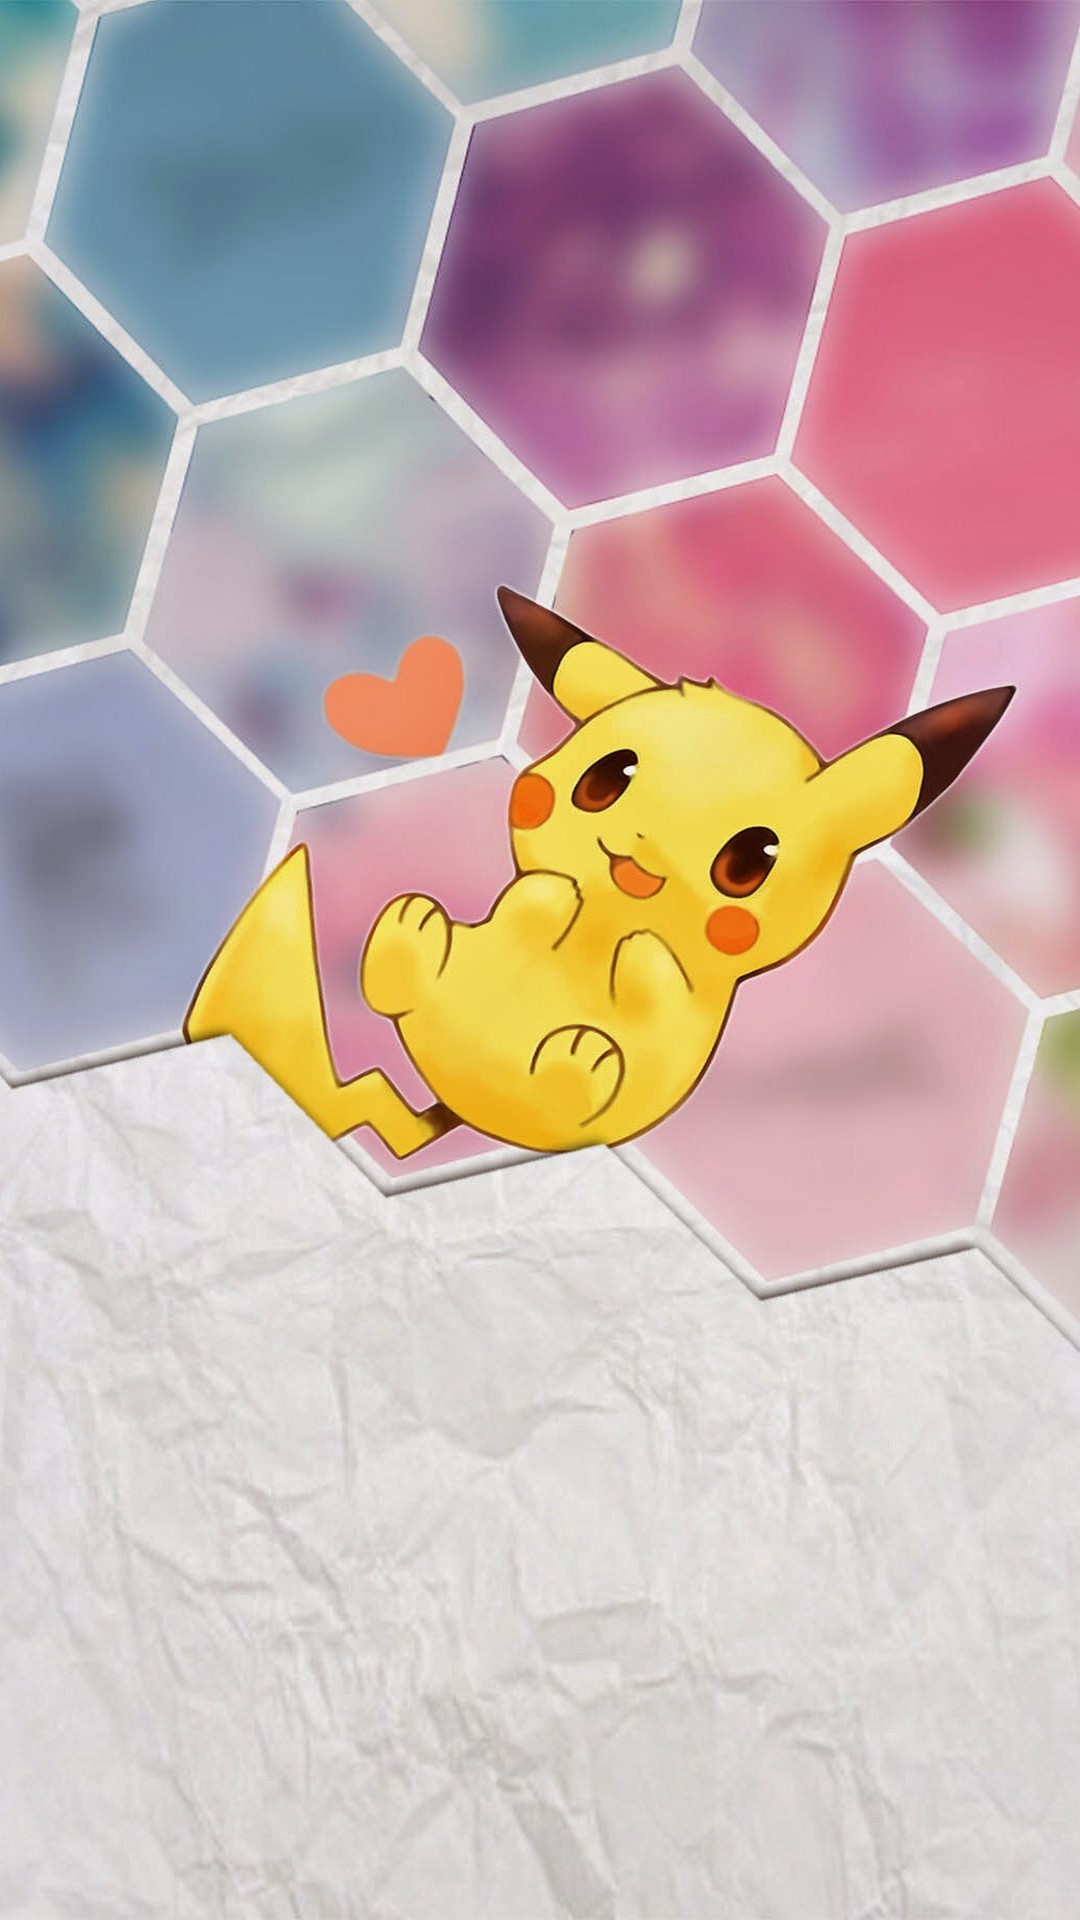 1080x1920 Animal crossing Â· Tap image for more iPhone 6 Plus Pikachu wallpapers!  Pikachu - @mobile9 | Cute